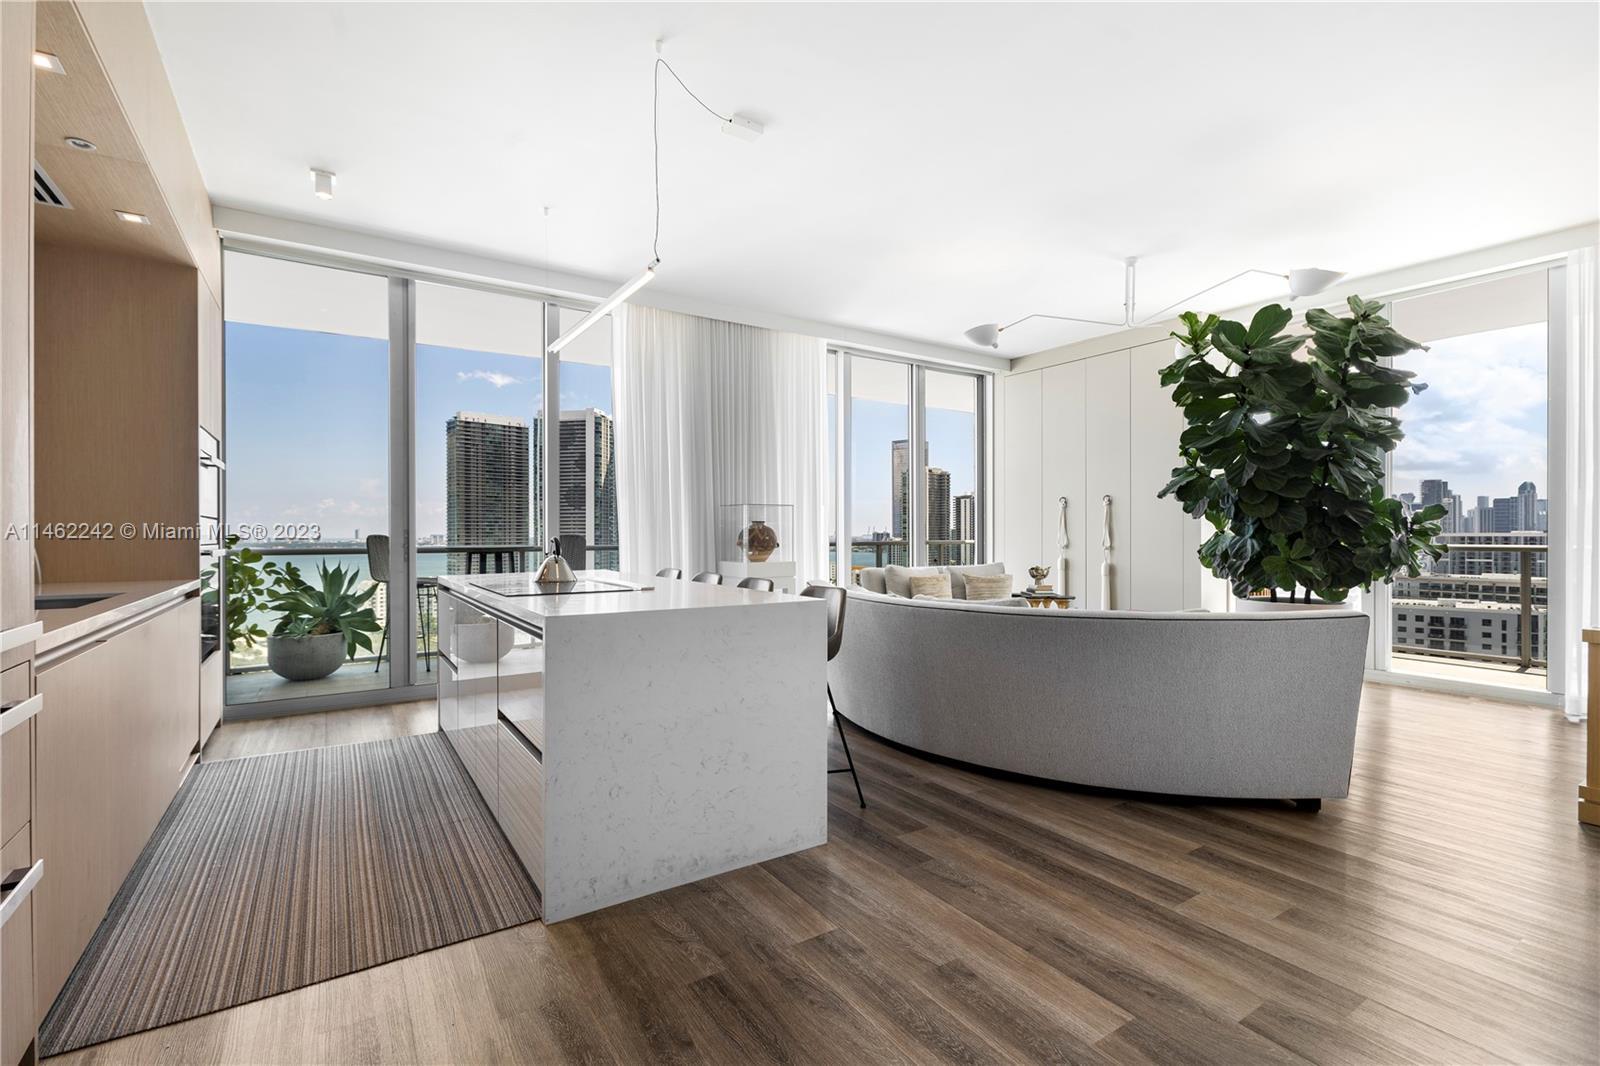 Welcome to vibrant Midtown Miami and this exquisite corner residence at 2 Midtown. This fully-furnis